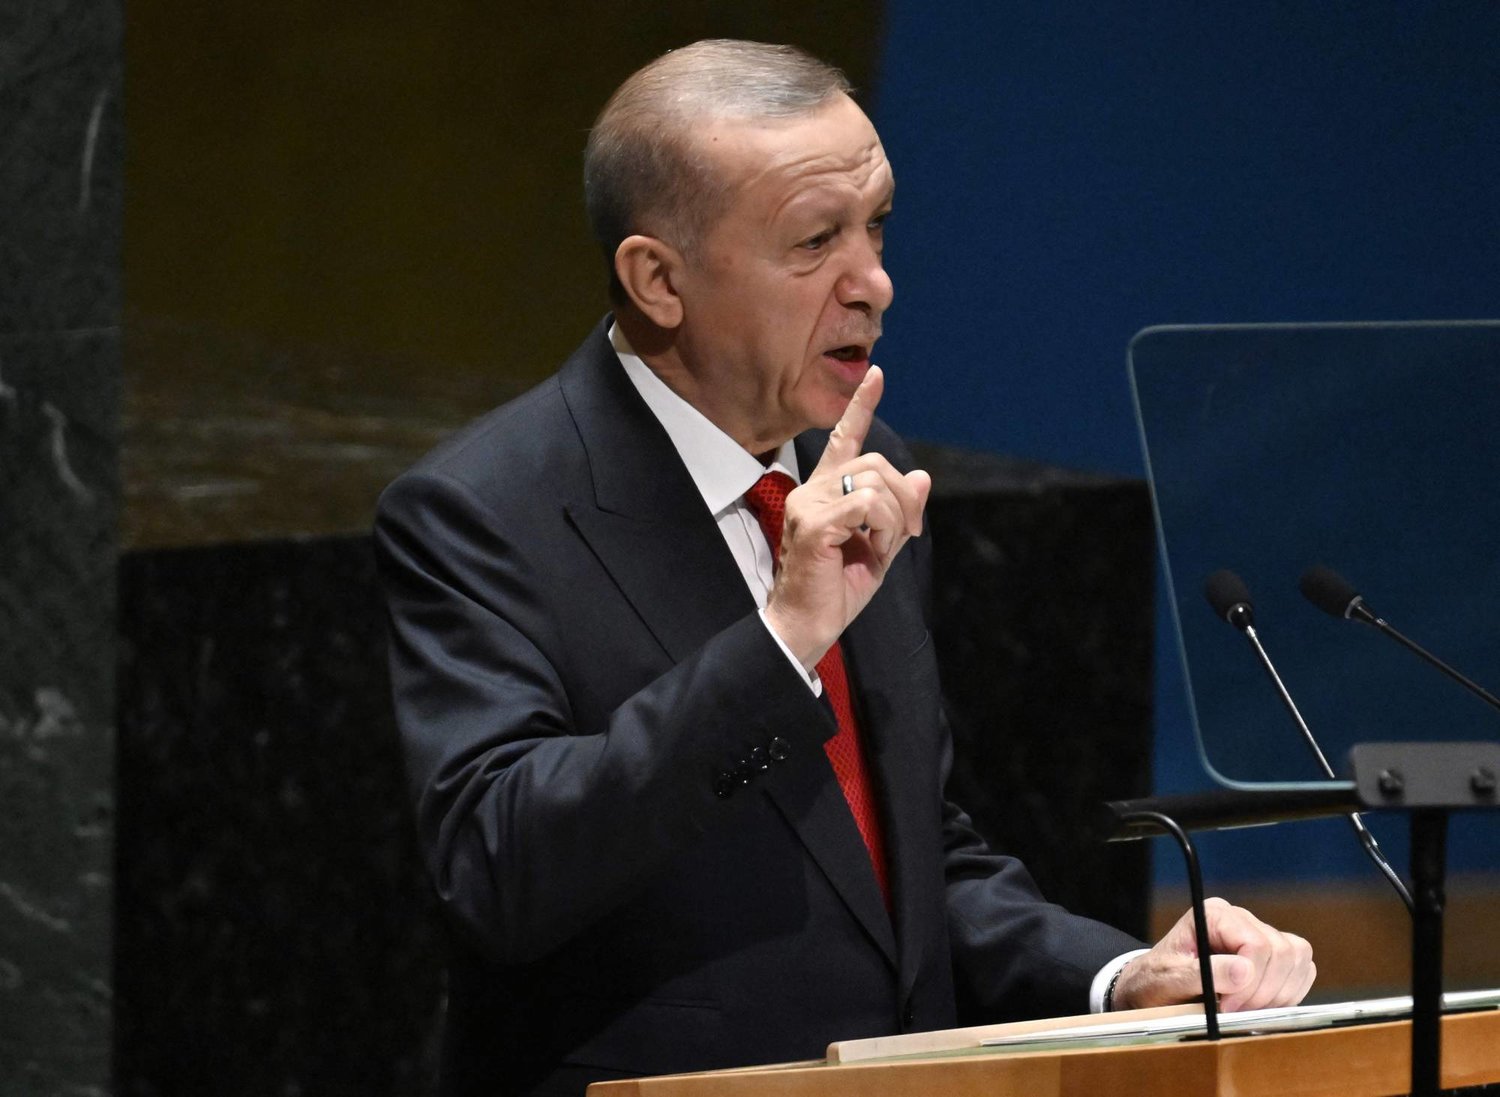 Turkish President Recep Tayyip Erdogan addresses the 78th United Nations General Assembly at UN headquarters in New York City on September 19, 2023. (Photo by Ed JONES / AFP)